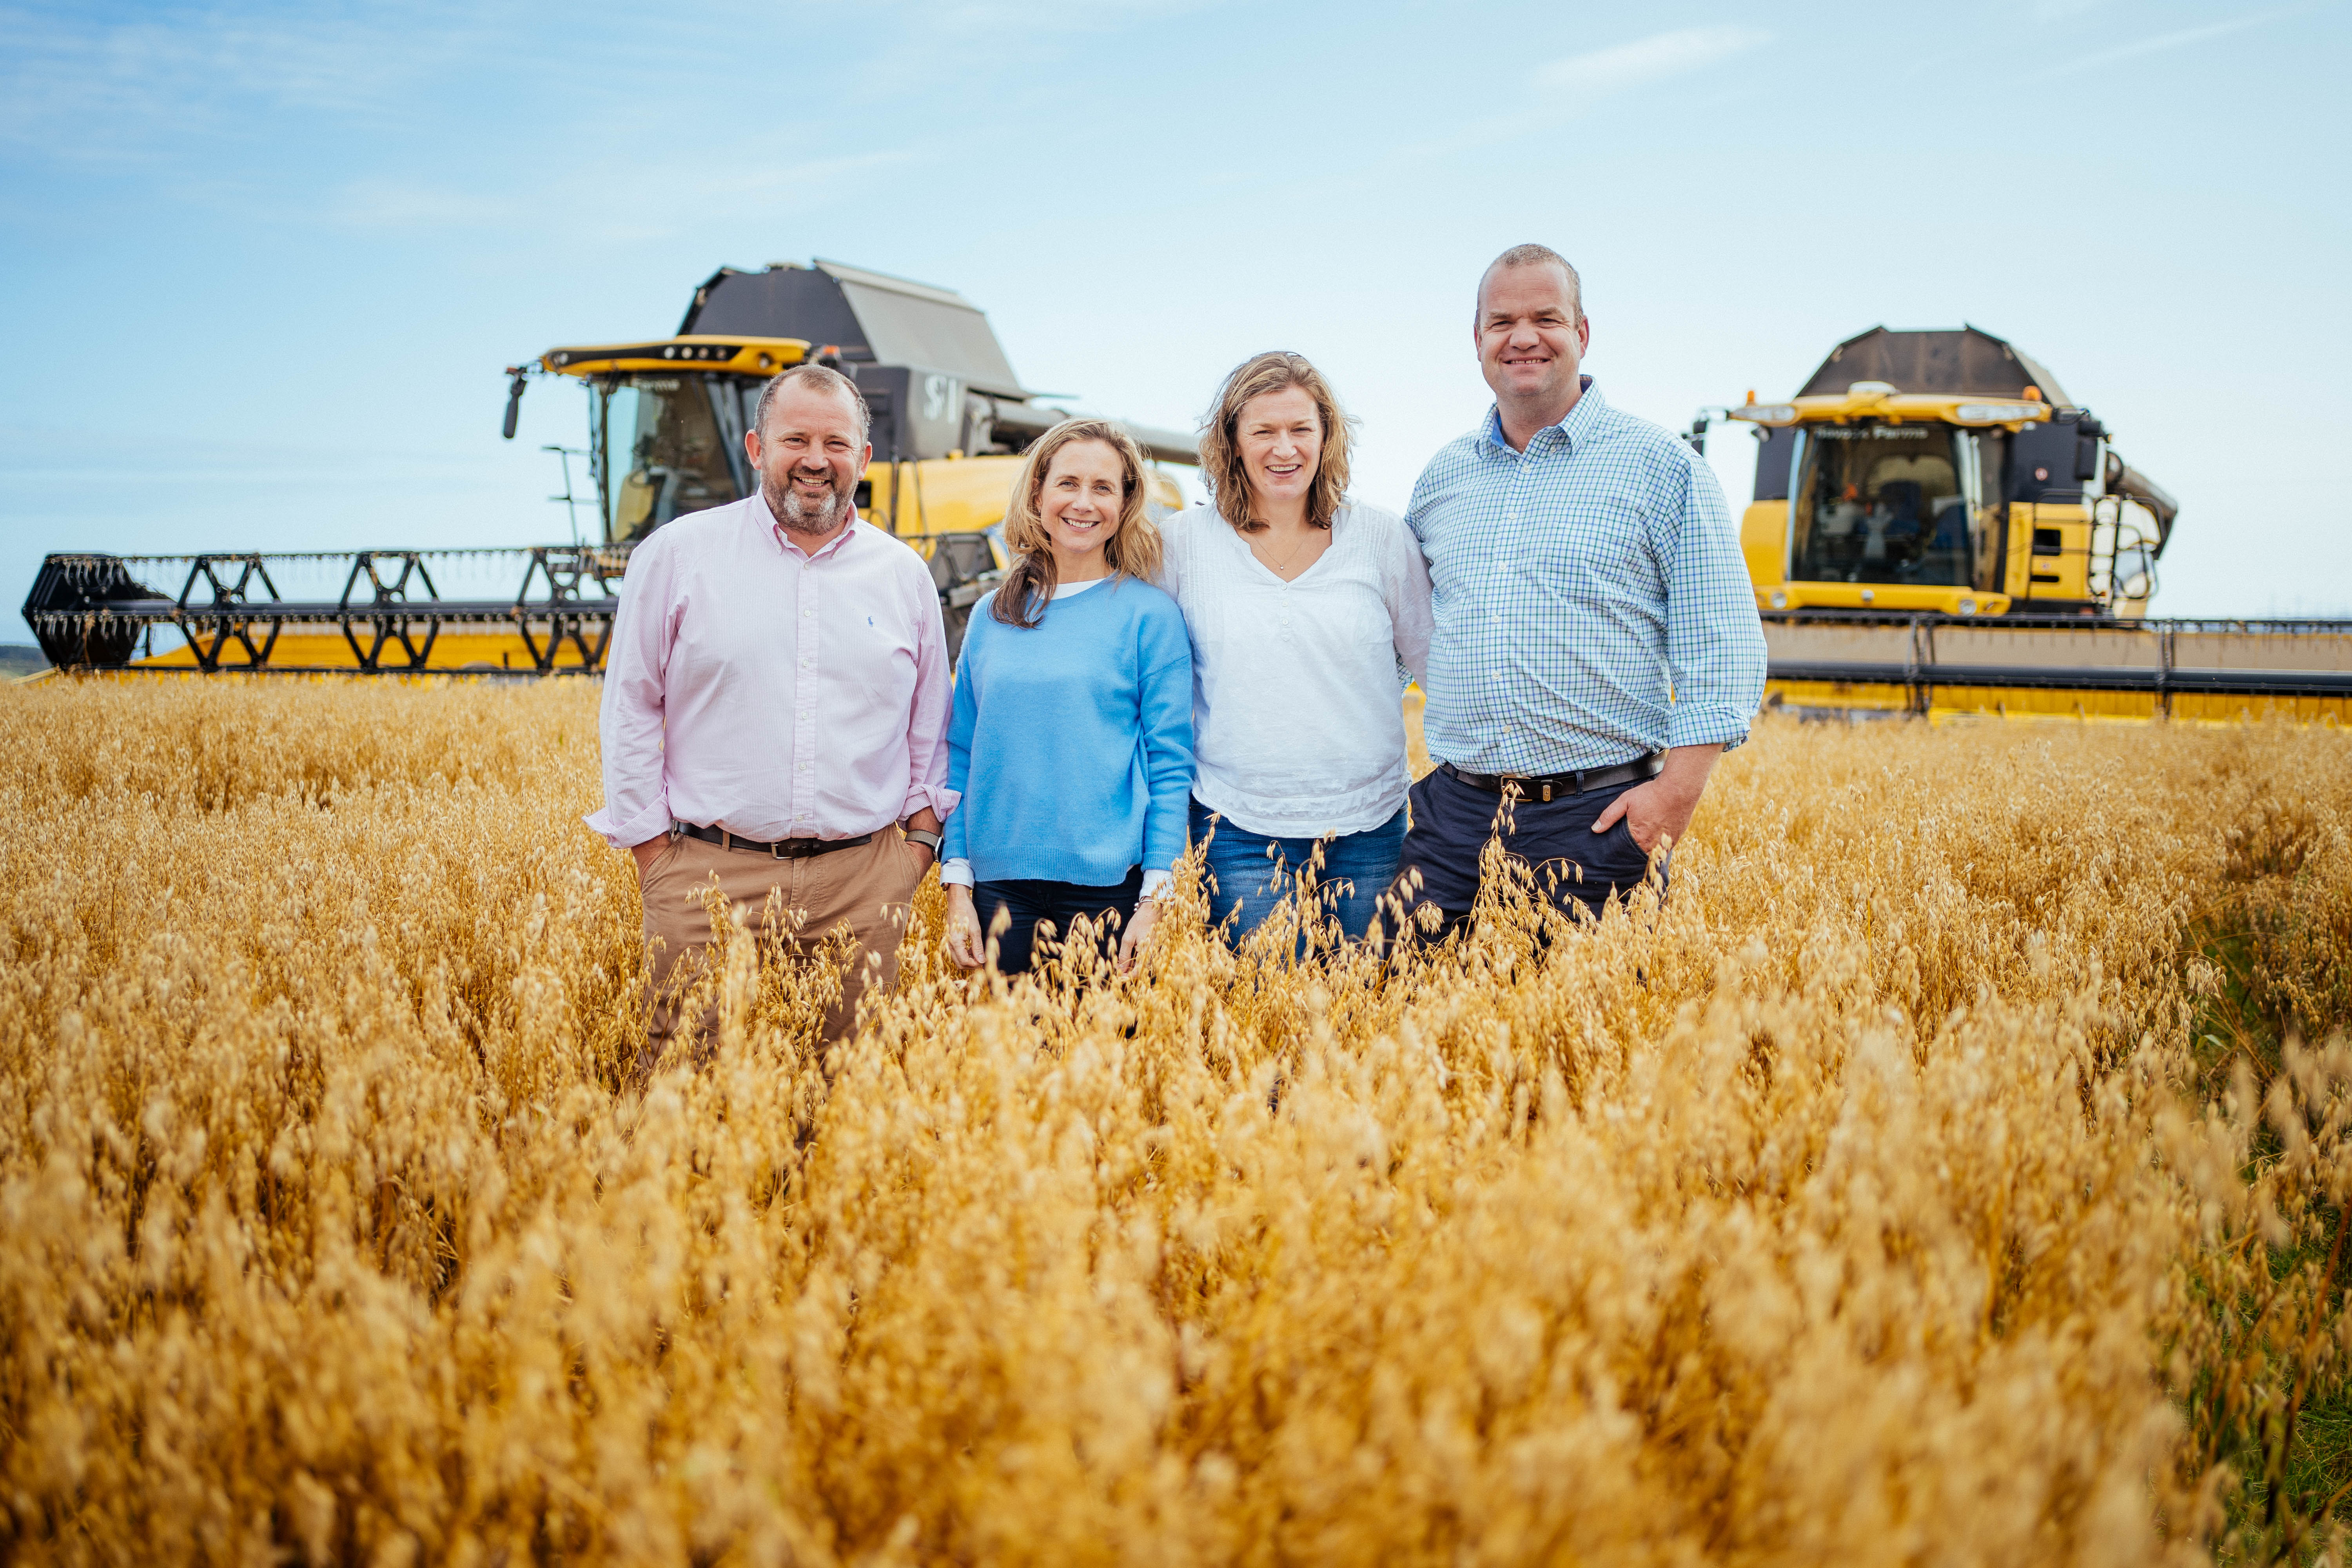 Scotland's first gluten free oat plans launched with £2m investment